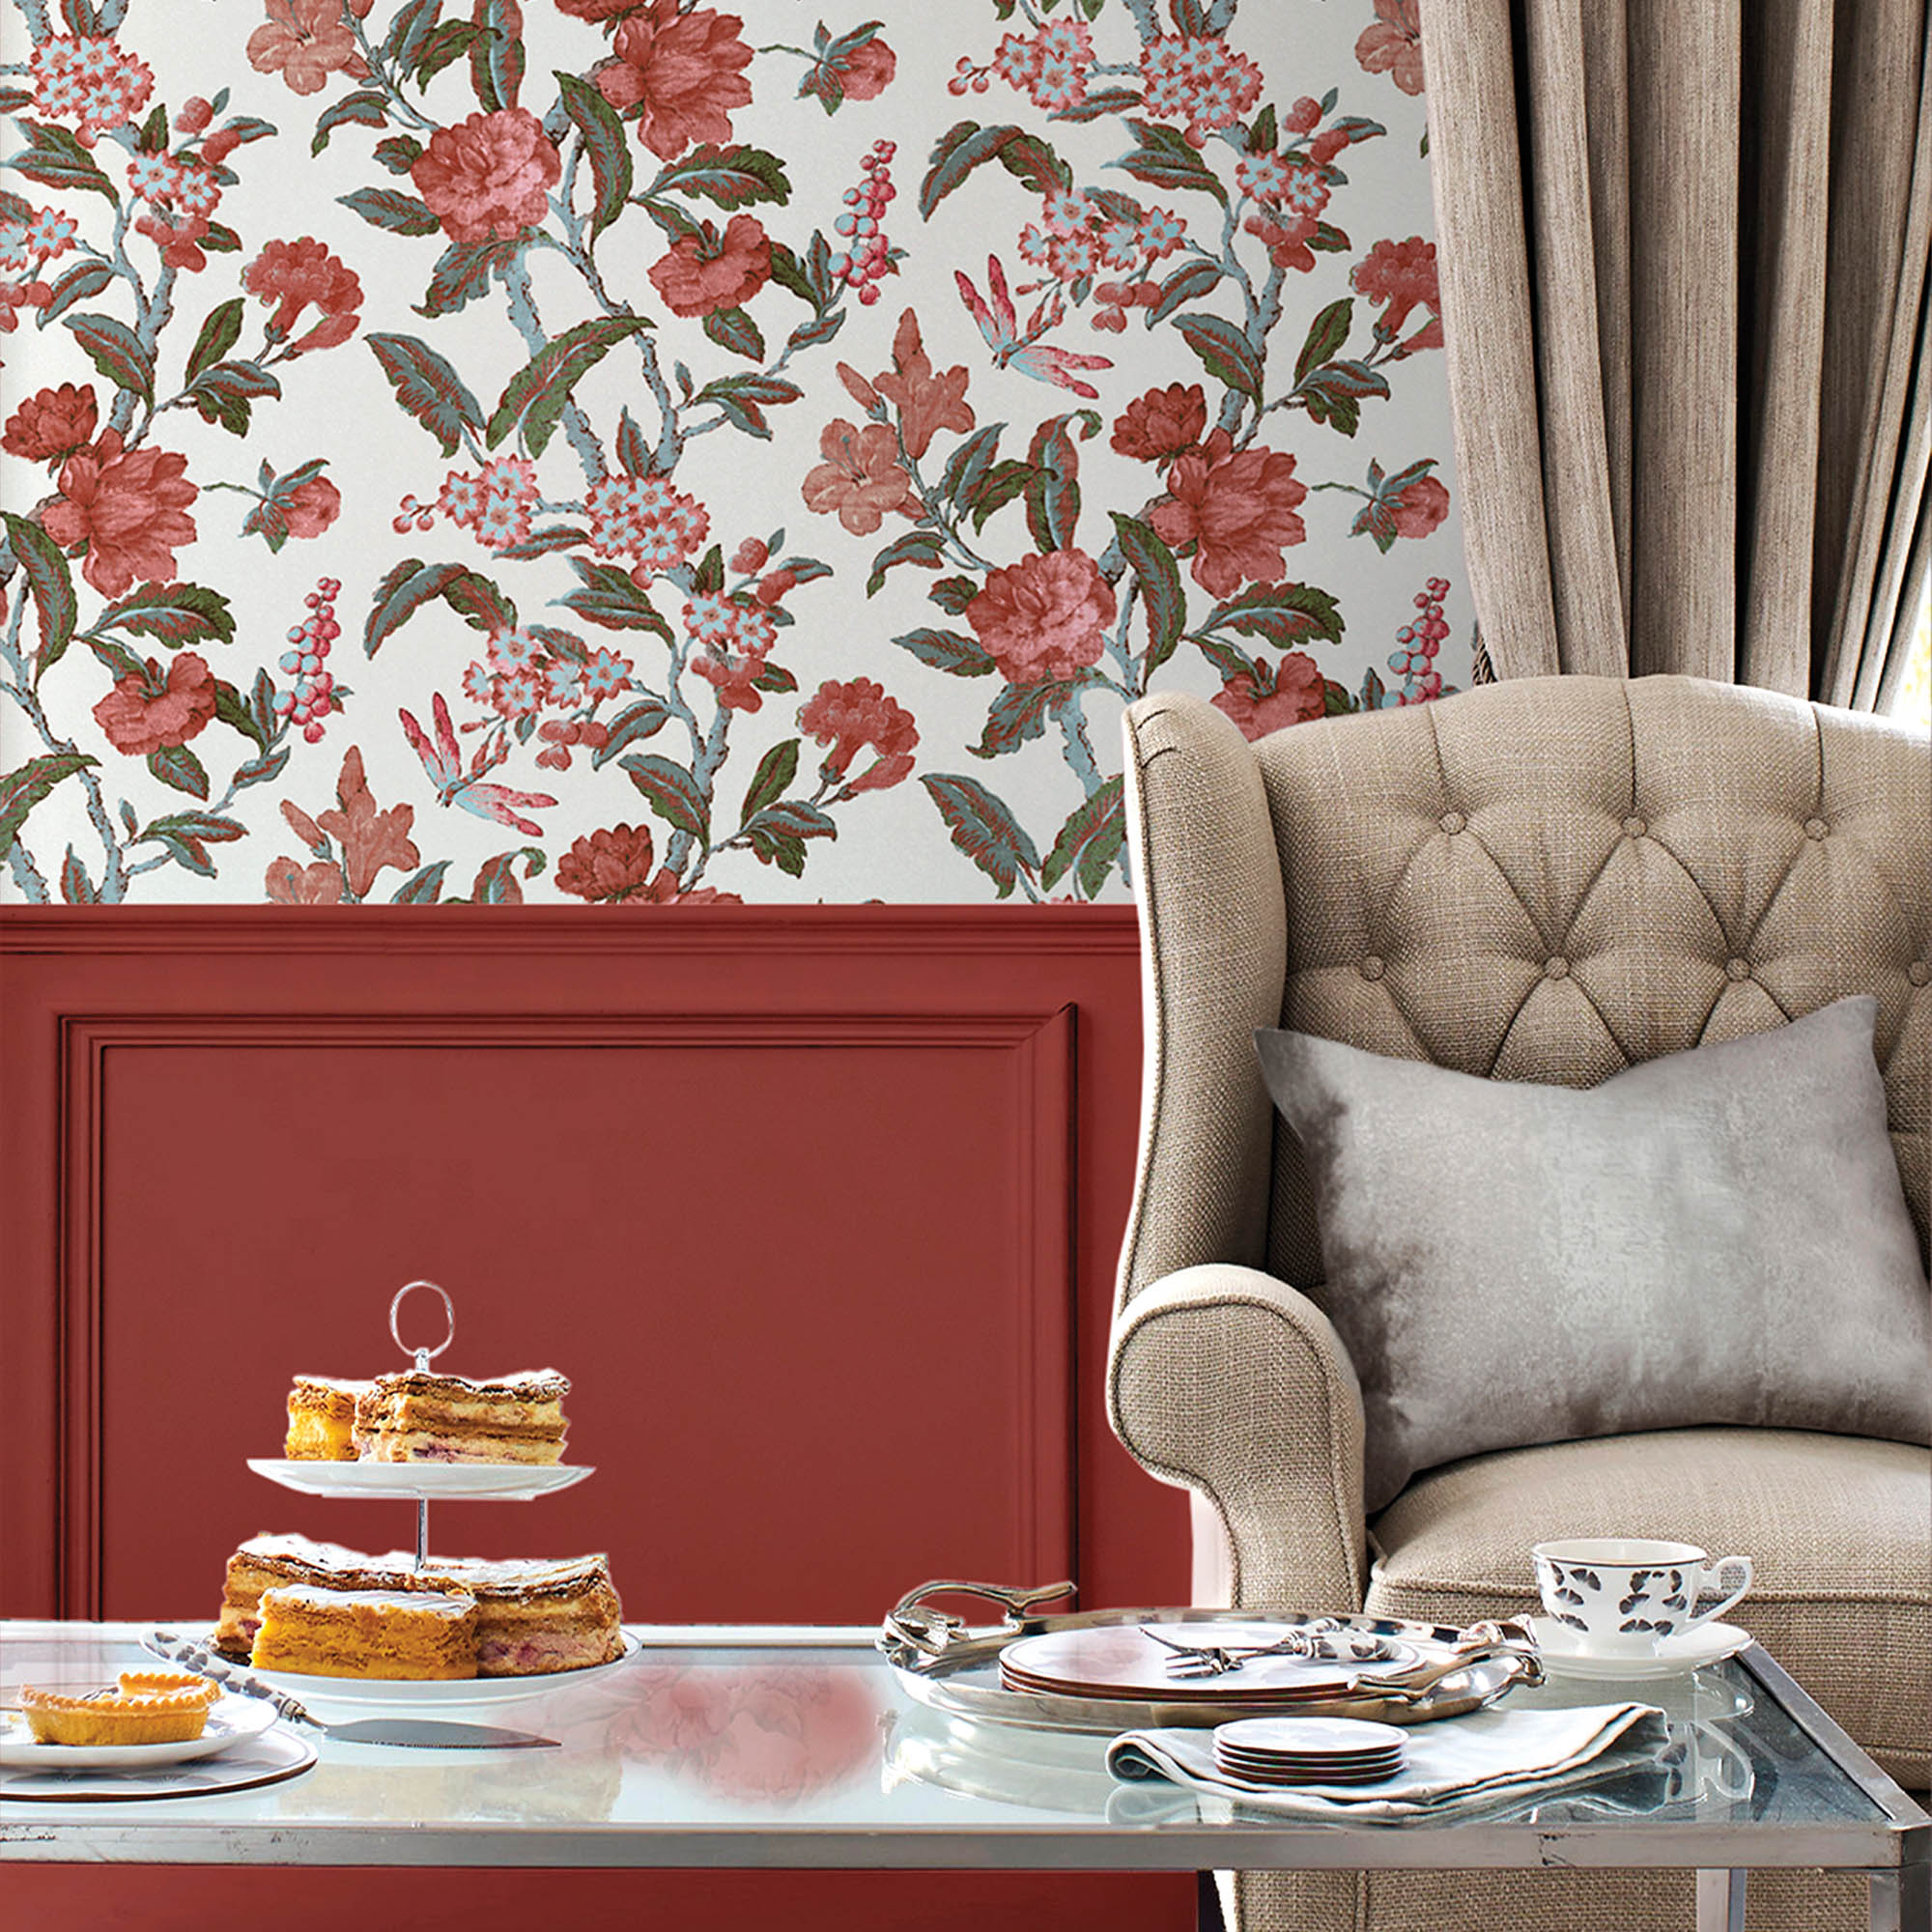 Pink-floral Laura Ashley wallpaper behind a cream wing-backed armchair in front of a coffee table